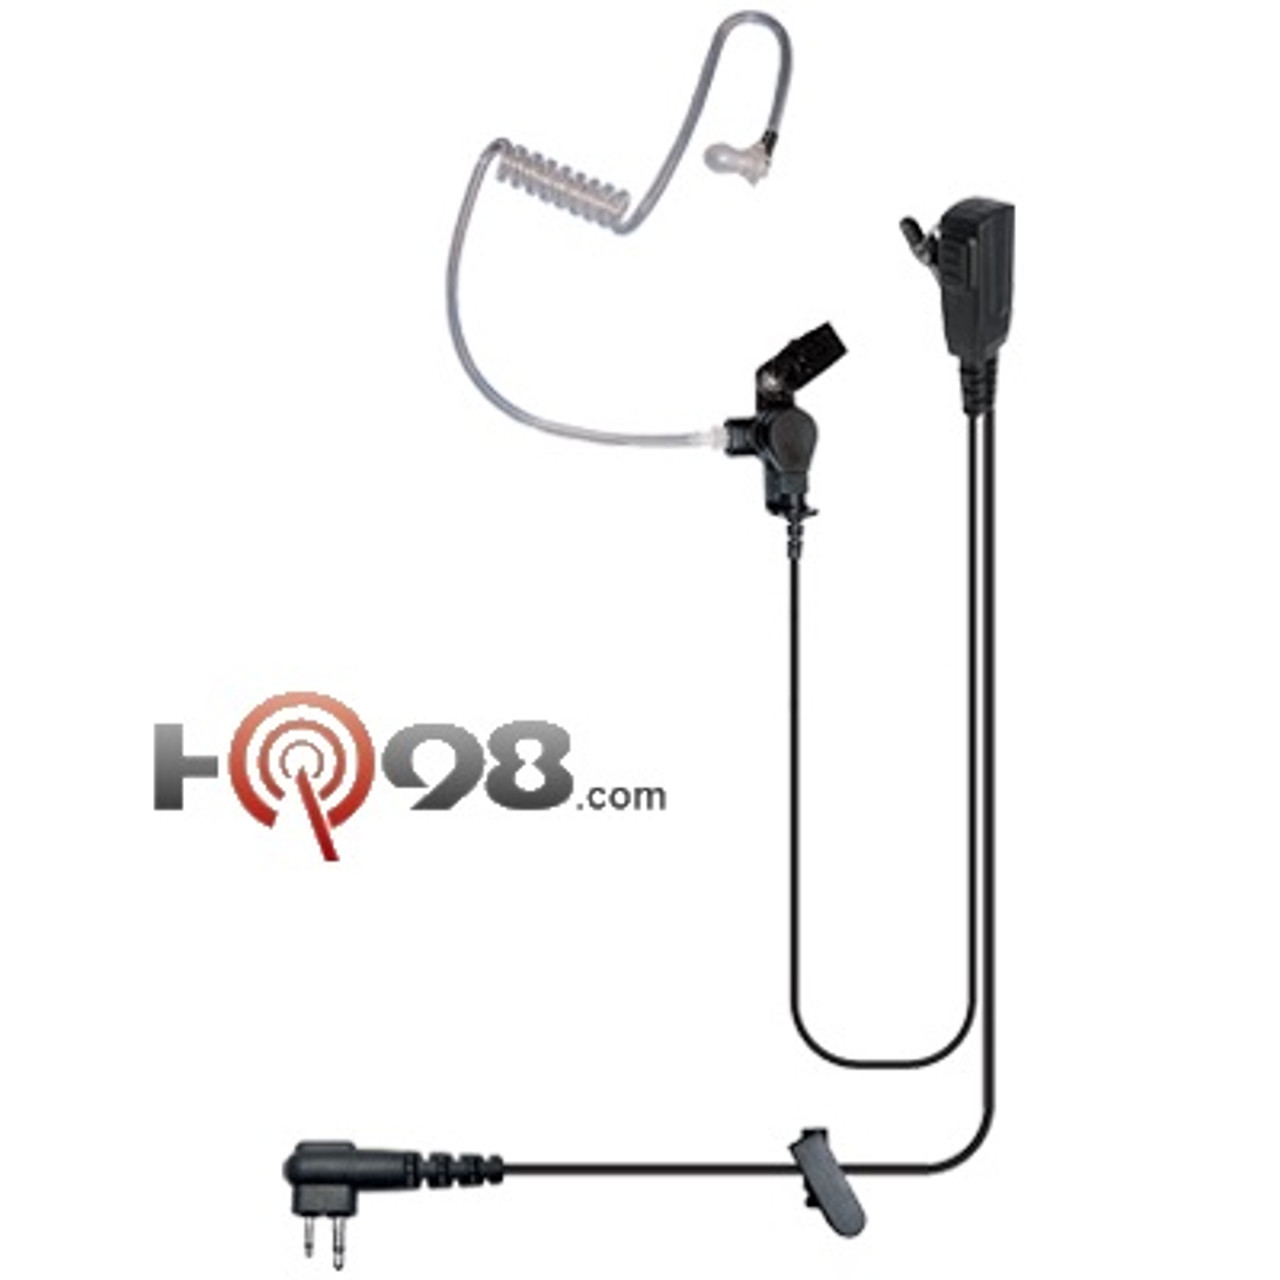 Rocket Science Signal 2-Wire Surveillance Acoustic tube Earpiece has free  shipping from Klein electronics is a two wire that fits Motorola Talkabout